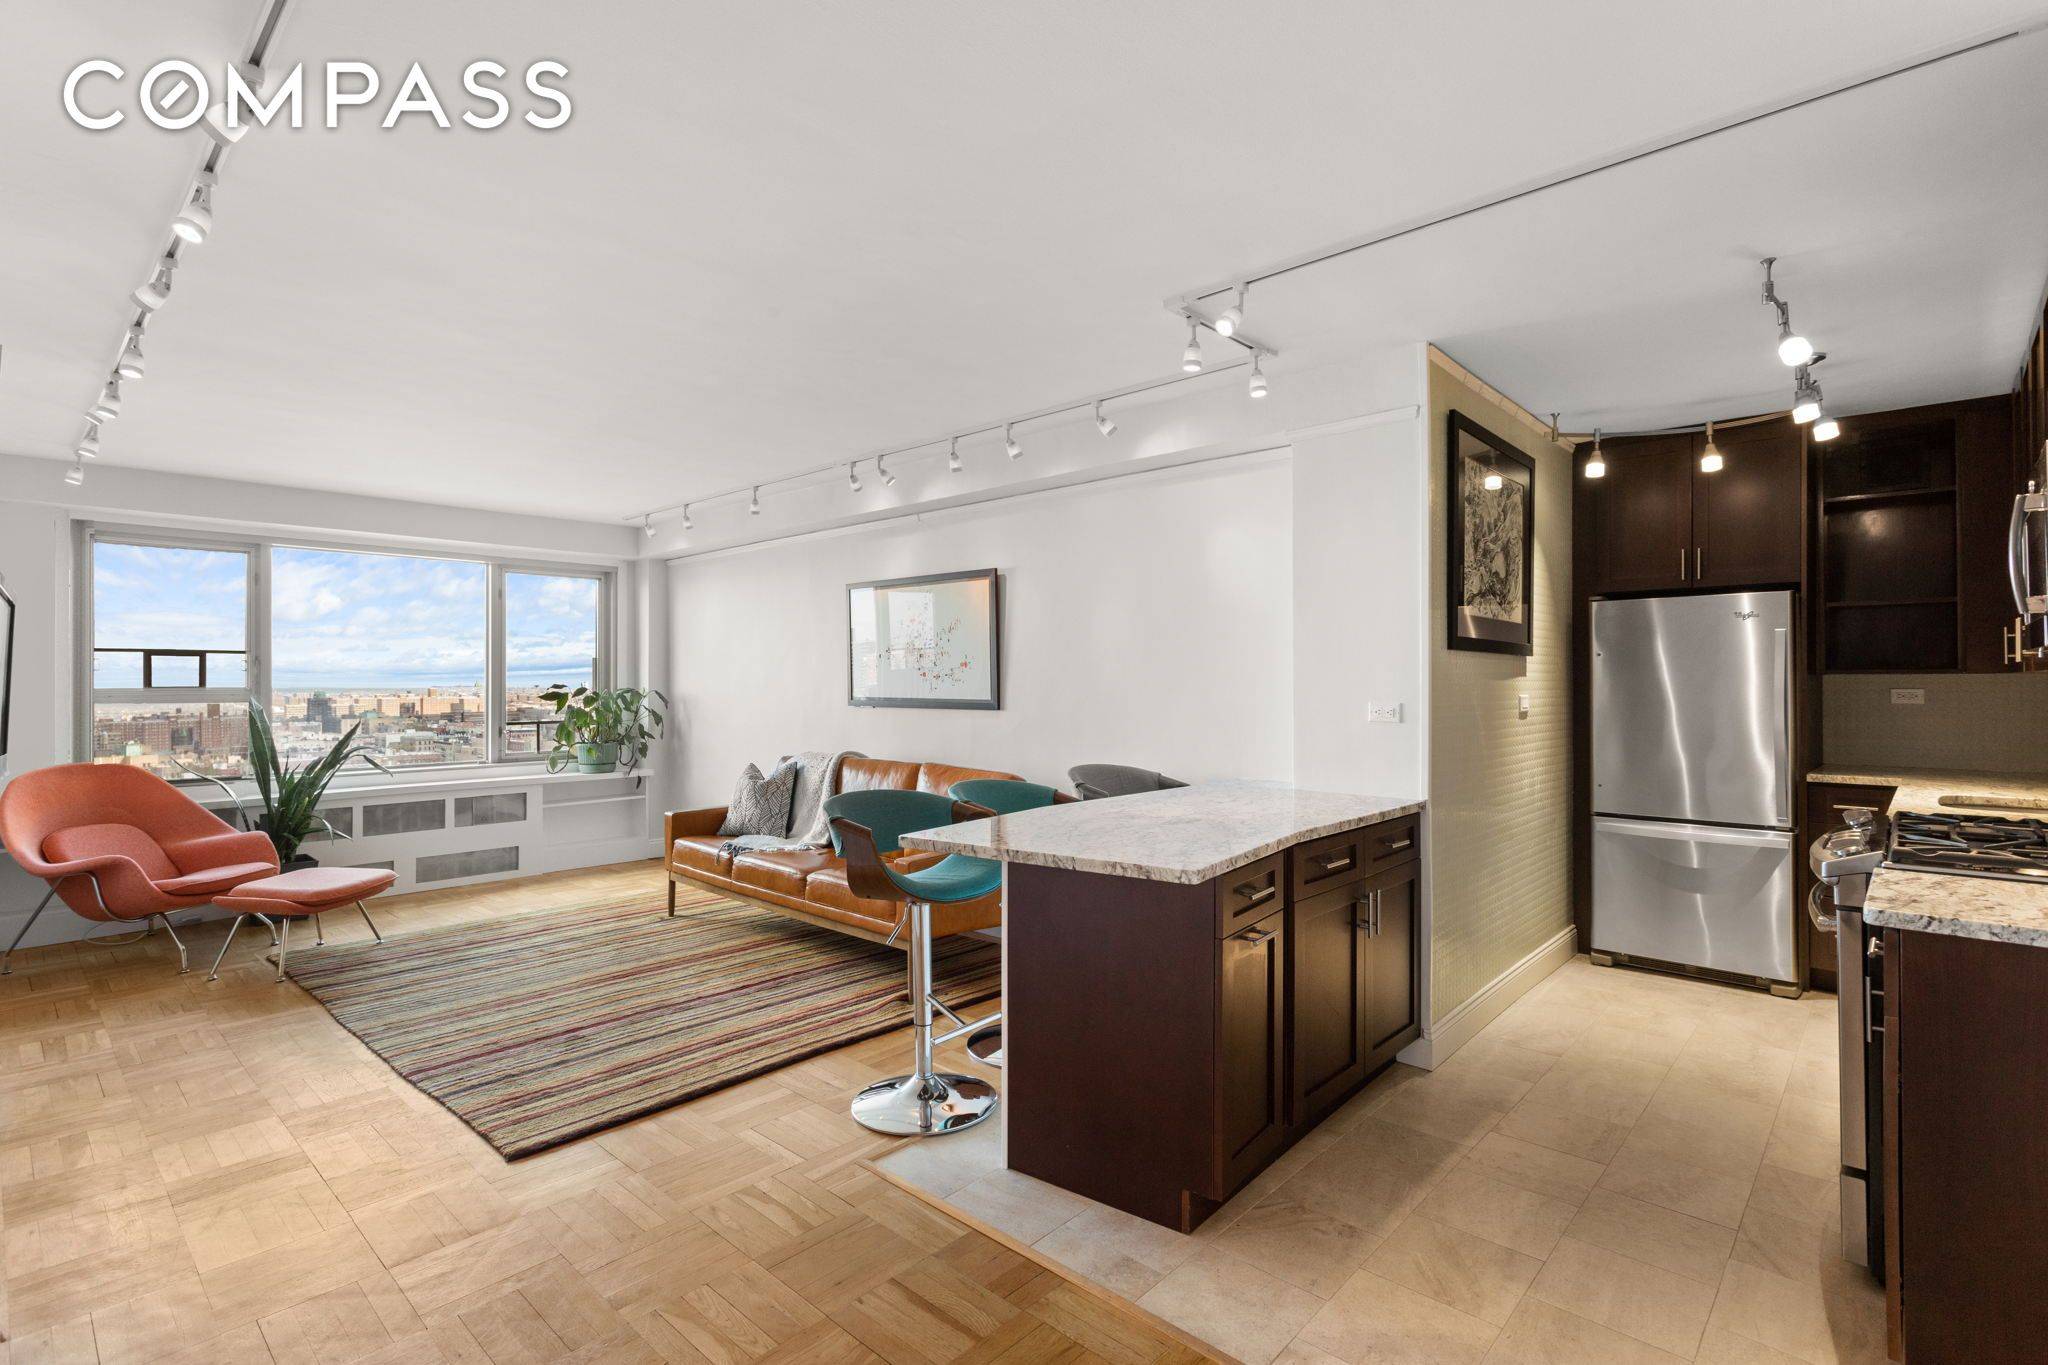 Welcome home ! This 14th floor apartment has abundant natural light with expansive panoramic east facing city views extending to the Throngsneck and Whitestone Bridges and has one of the ...